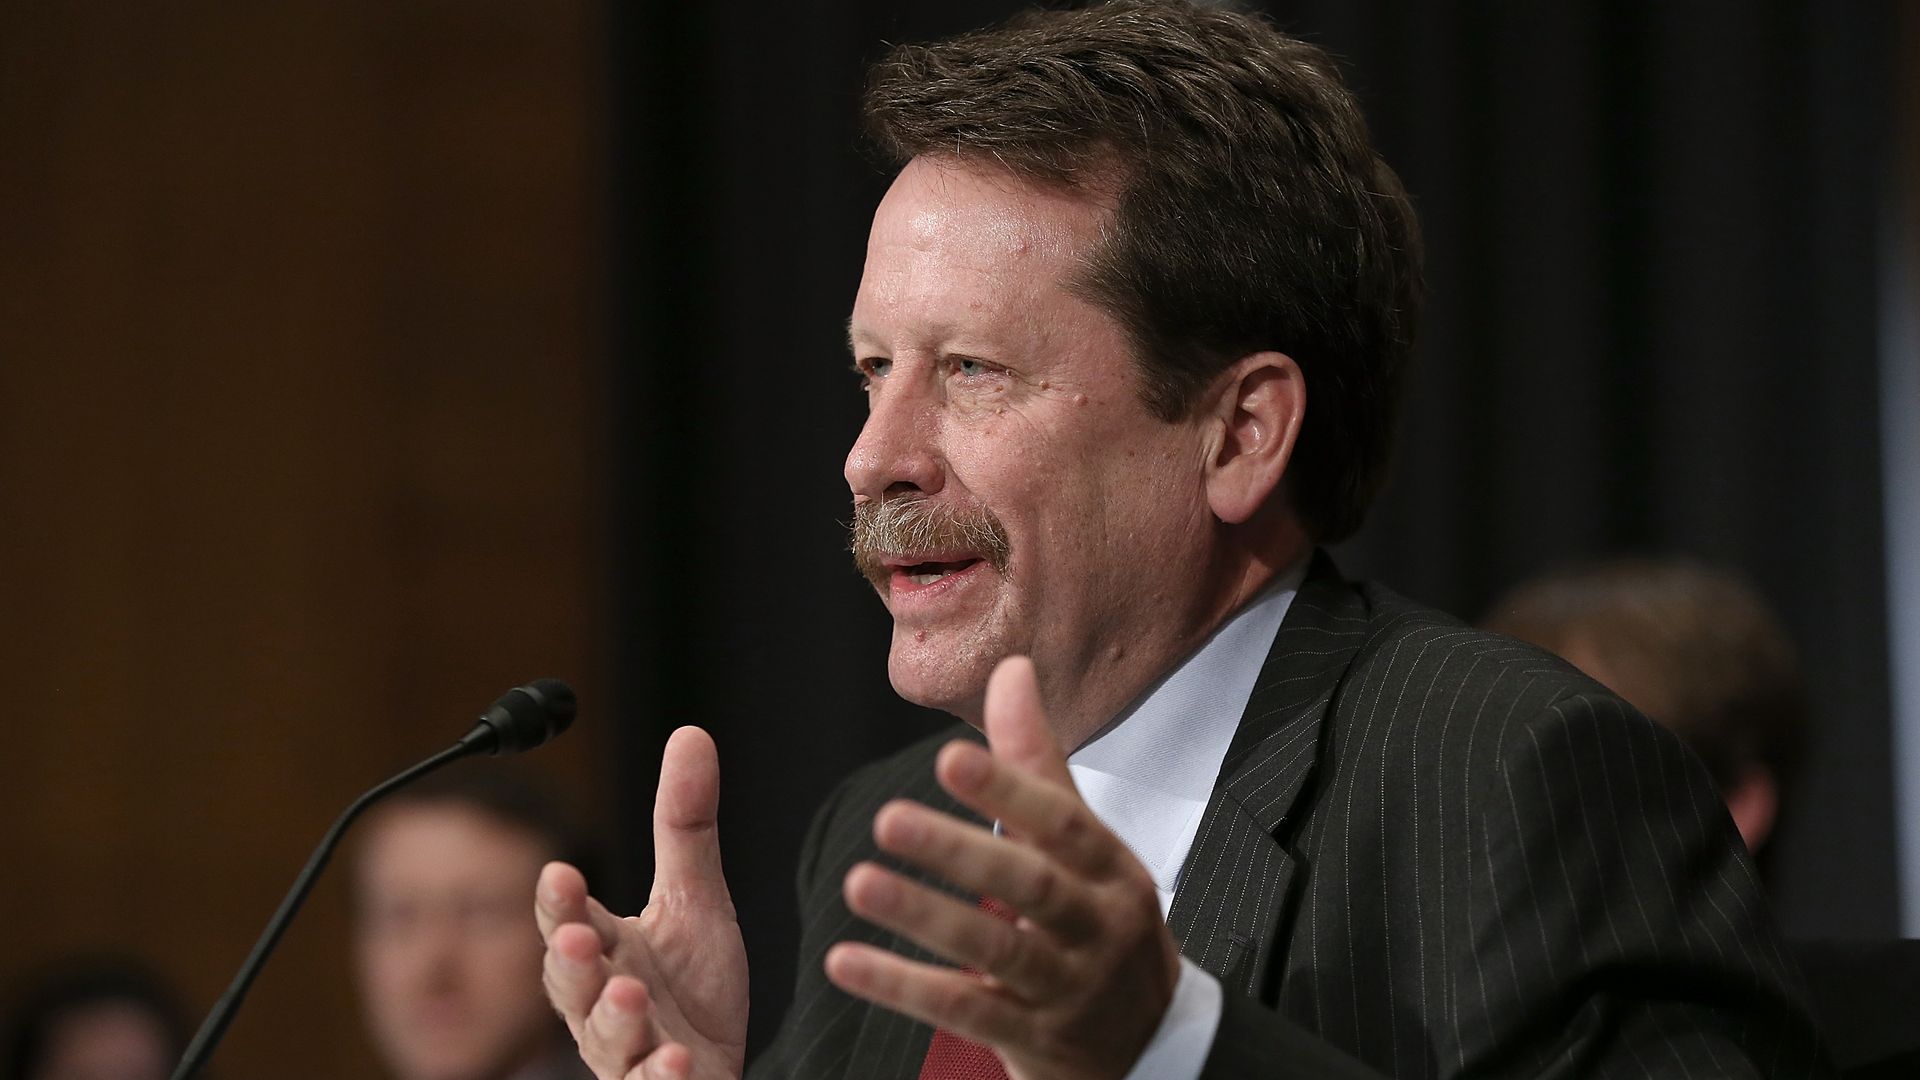 Dr. Robert Califf testifies during his nomination hearing before the Senate Health, Education, Labor and Pensions Committee November 17, 2015 in Washington, DC. 